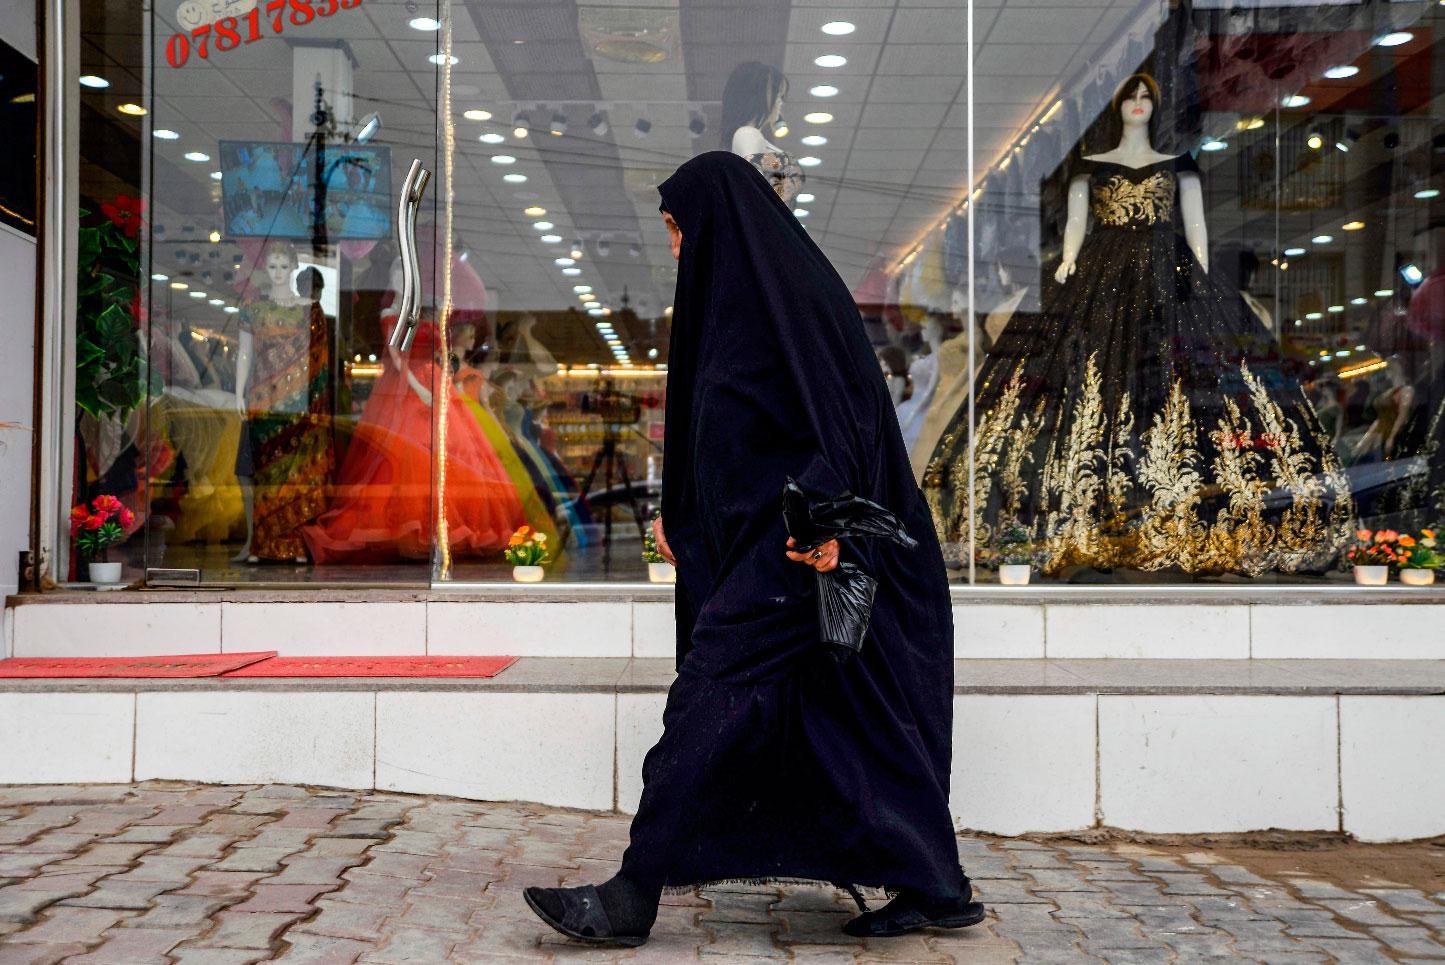 A woman walks past a dress shop in the central Iraqi city of Diwaniya on March 31, 2019